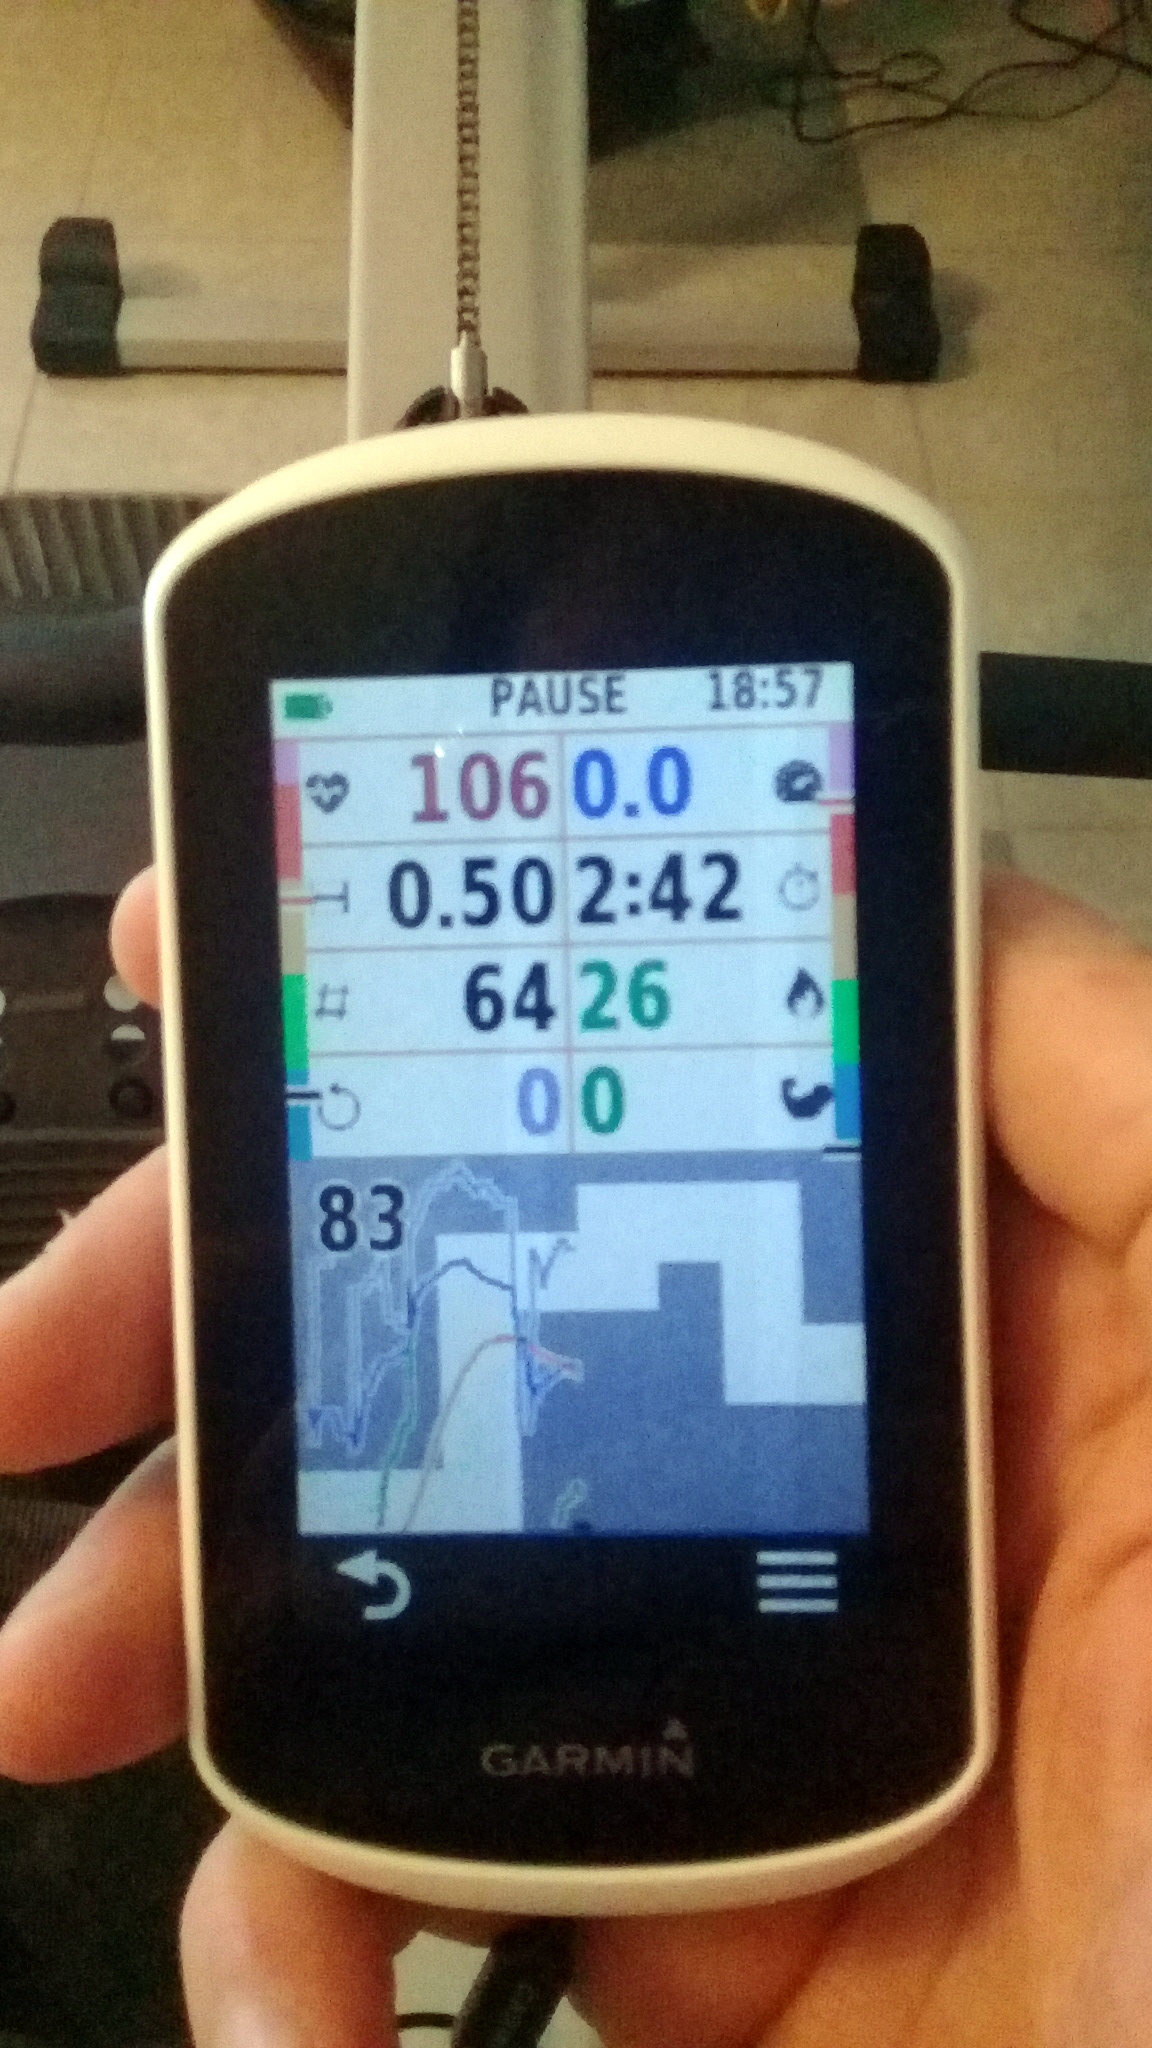 Data in the app after rowing.